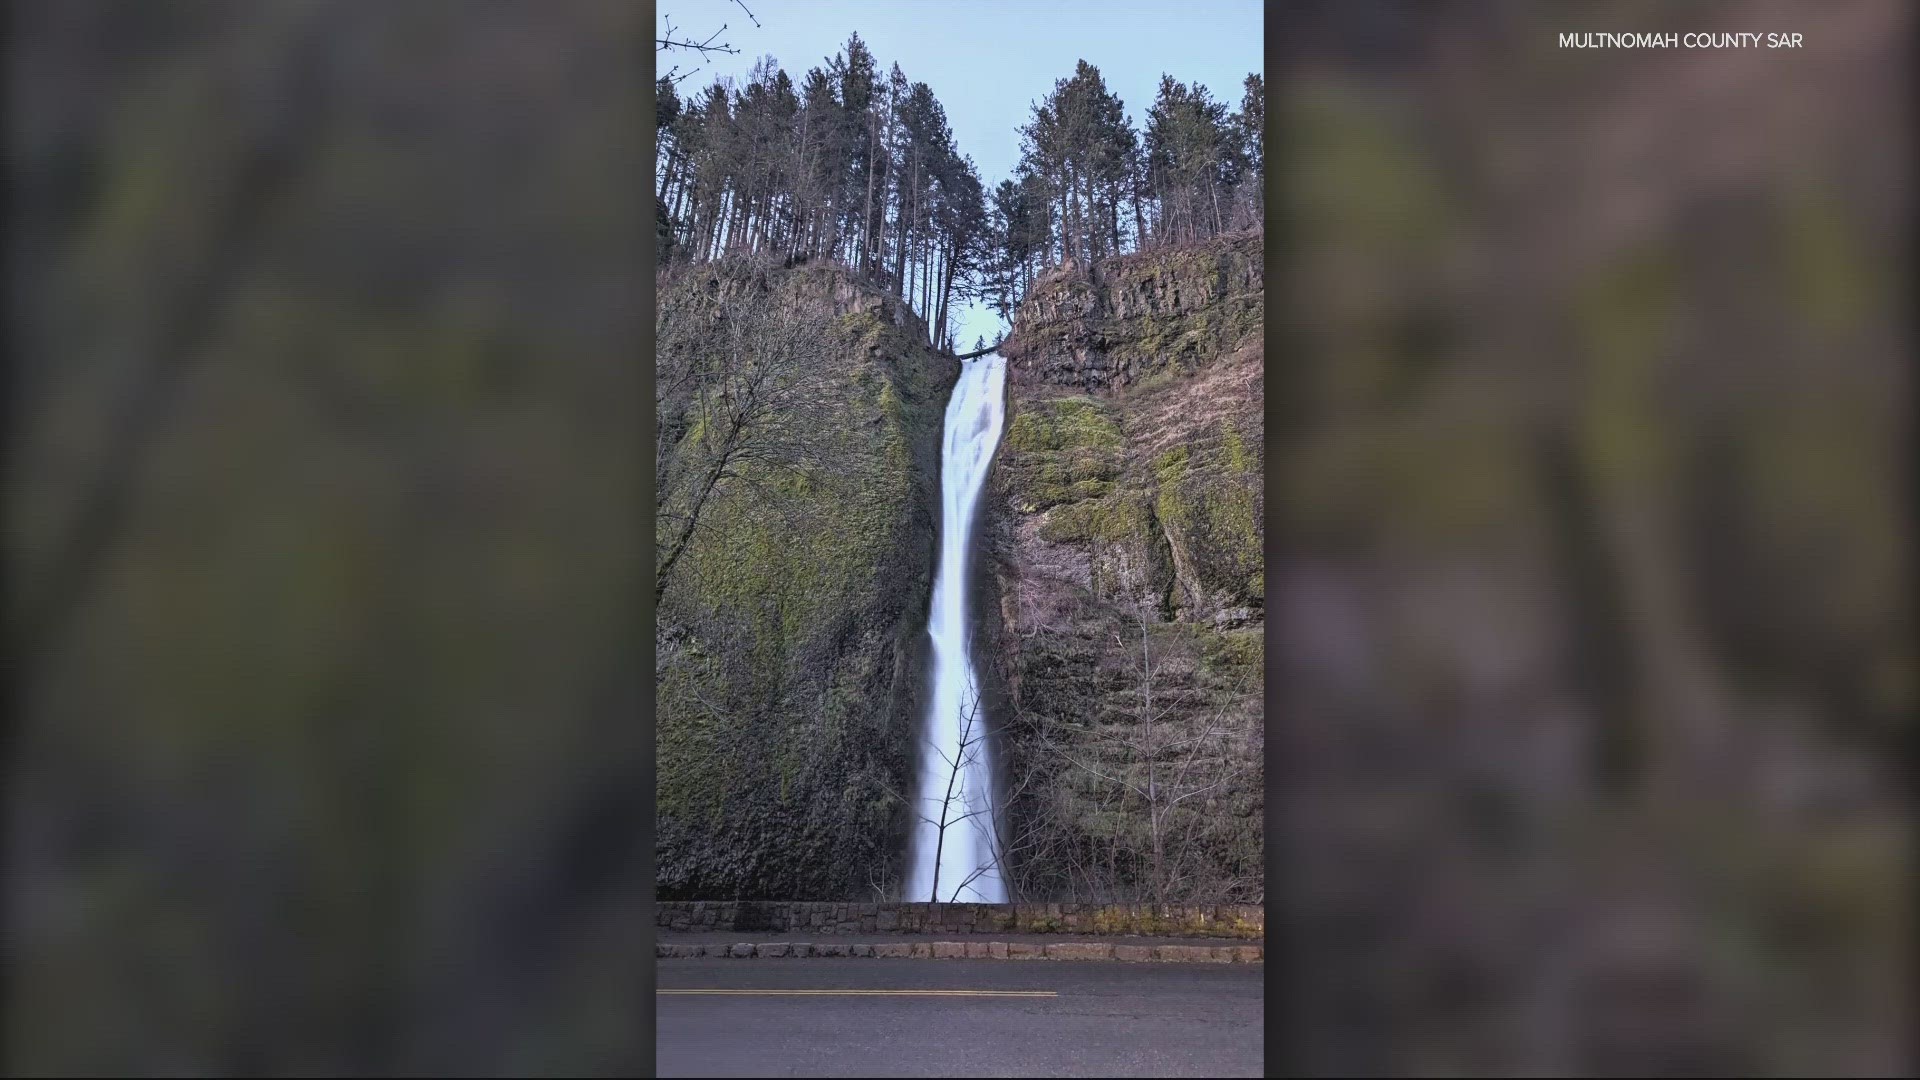 The Multnomah County Sherrif's Office had started searching Friday evening after the hiker did not return from a planned hike.